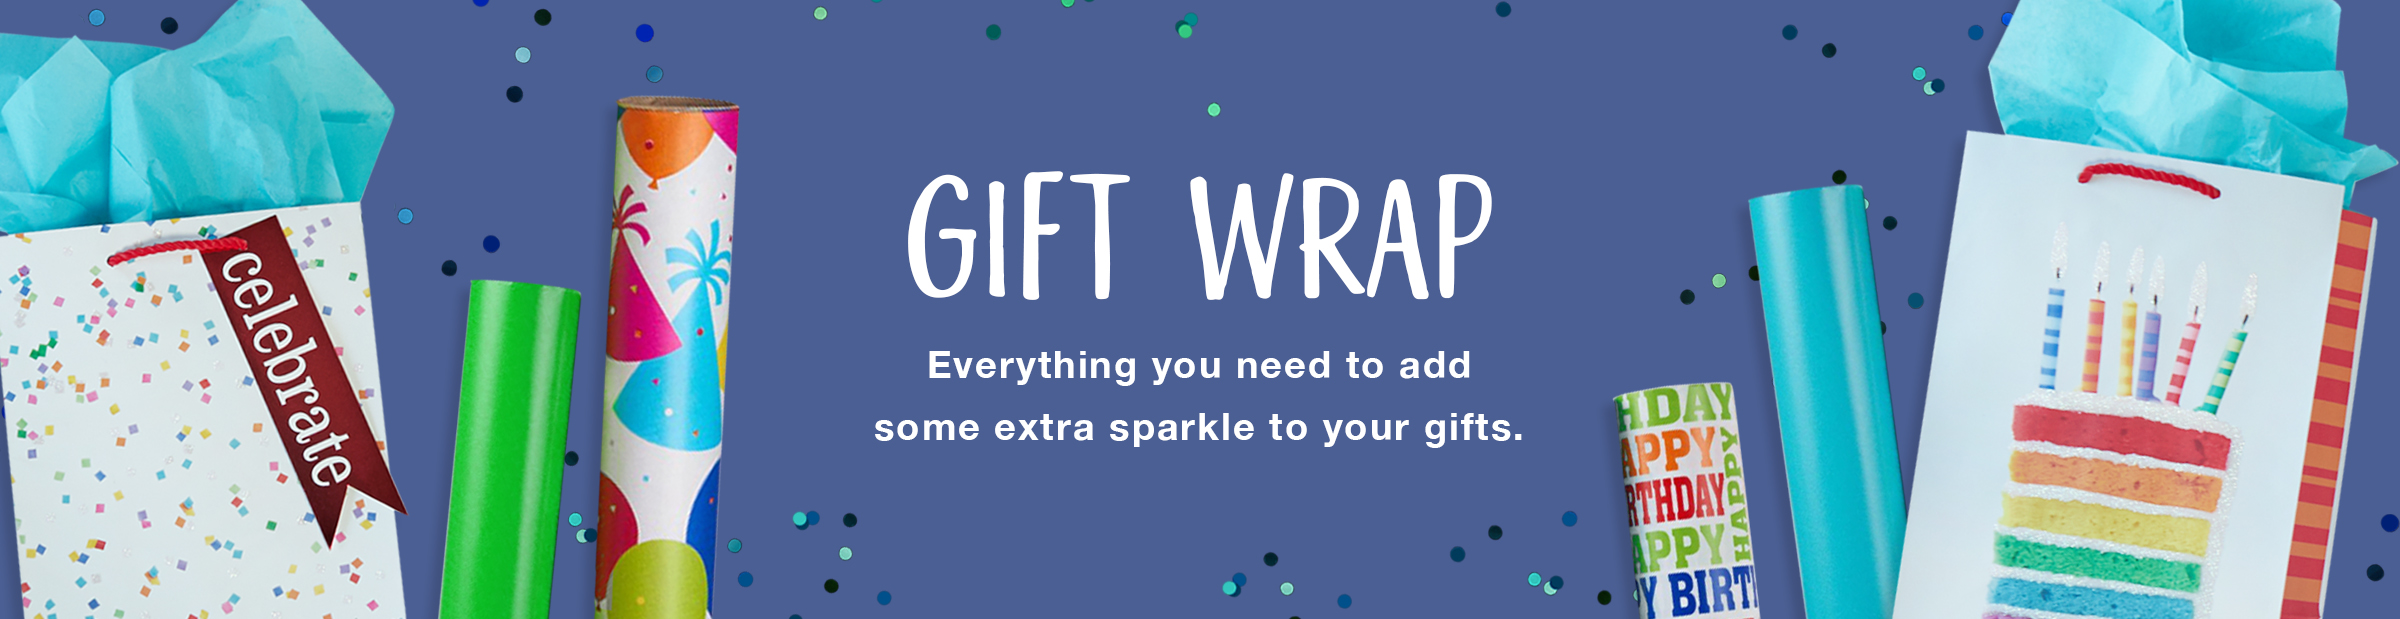 Gift Wrap, Gift Bags, Wrapping Paper, Bows and More